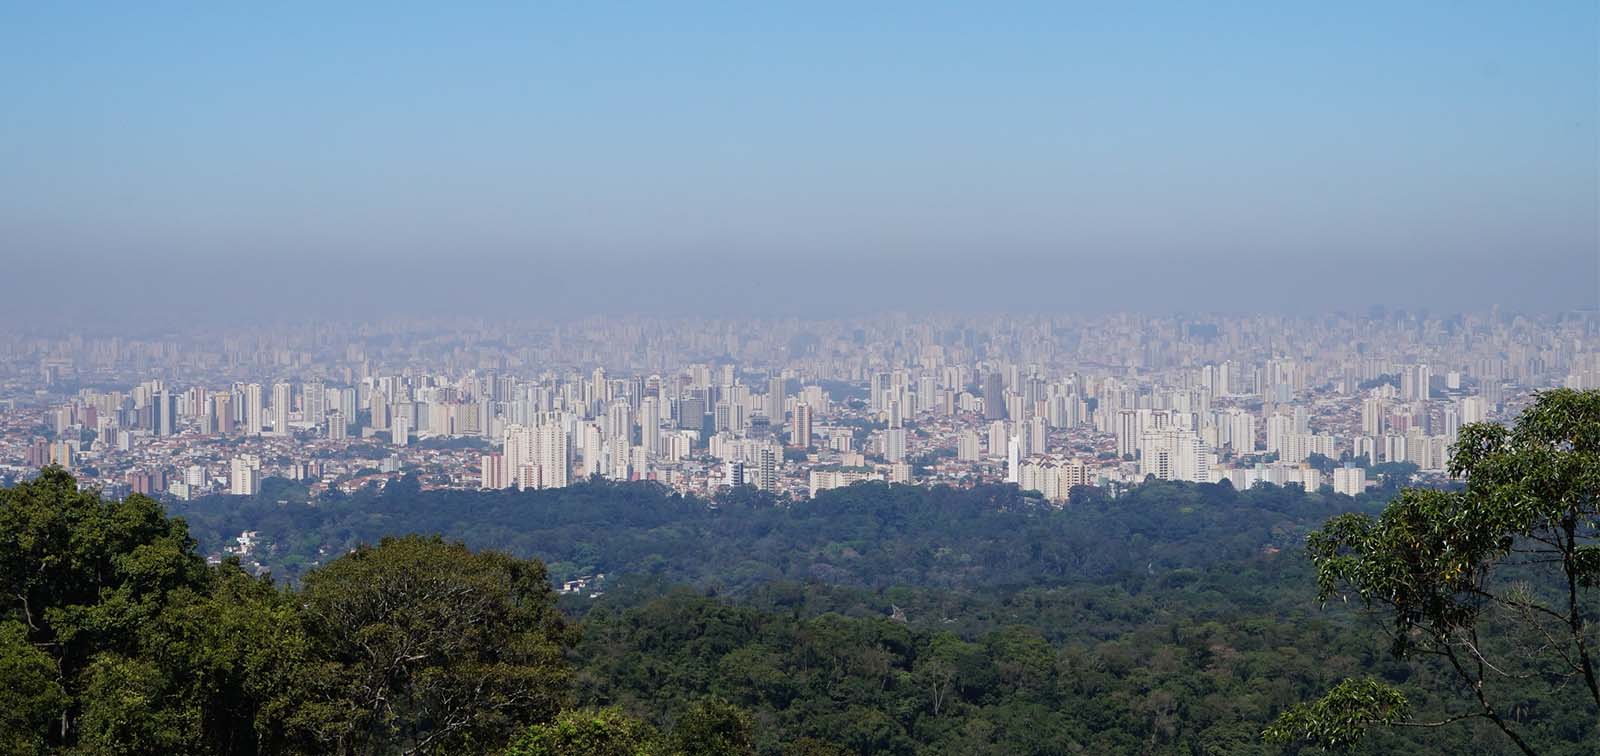 How Can the City of Sao Paulo Avoid More than 11,000 Annual Deaths